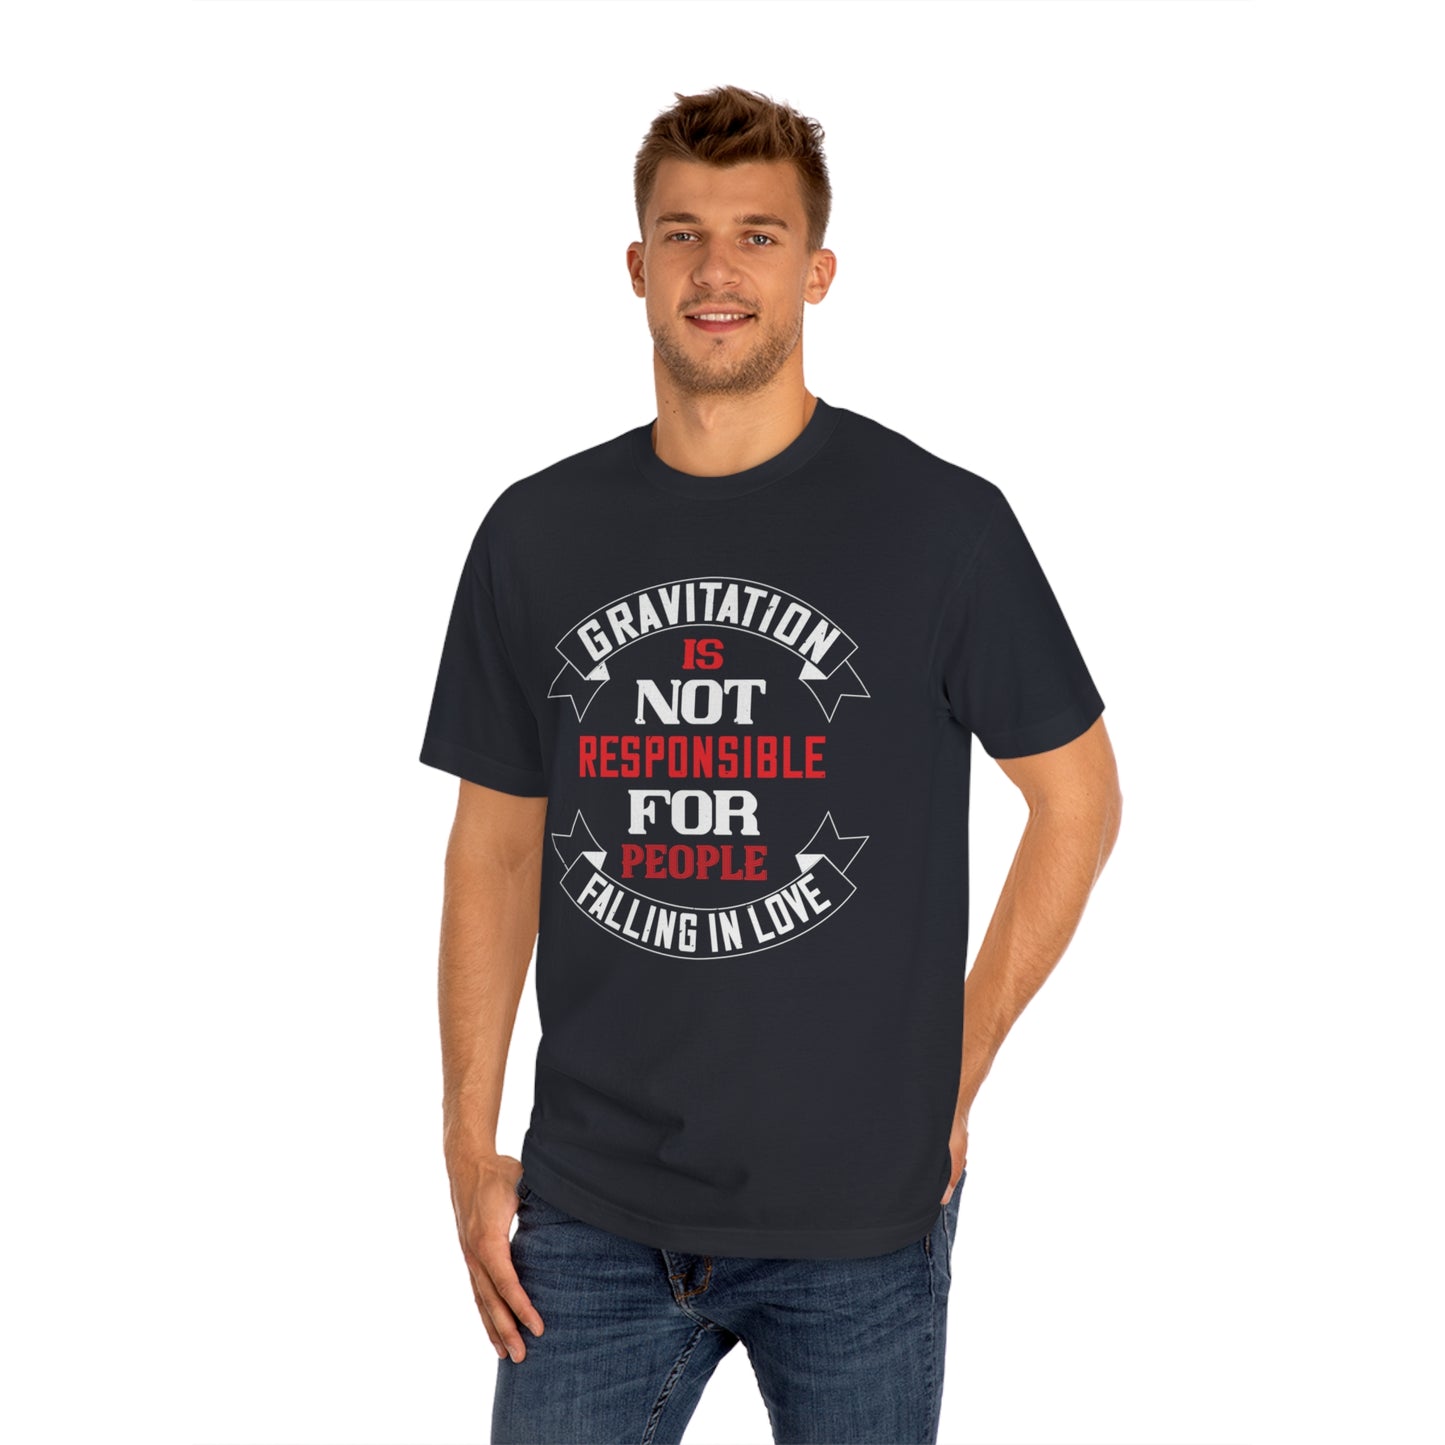 Gravitation is not responsible for falling in love Unisex Classic Tee